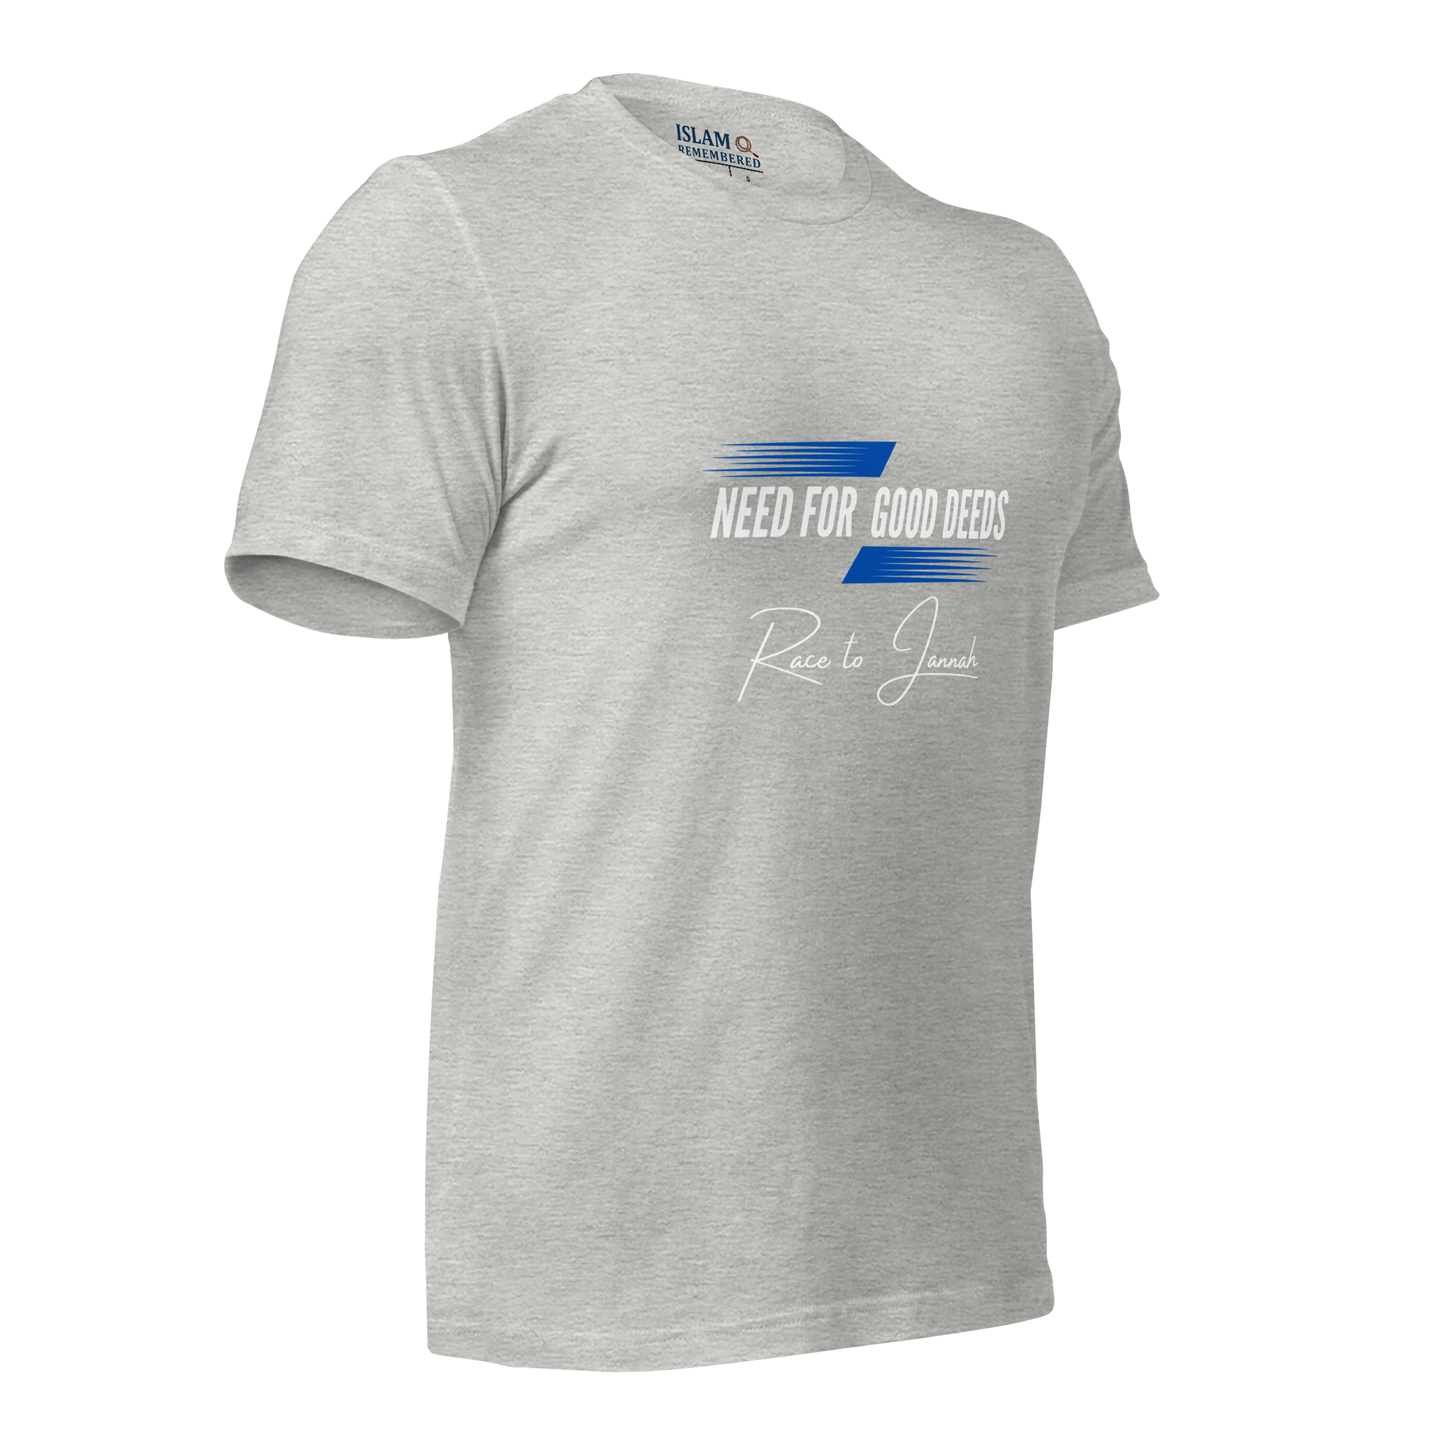 ADULT T-Shirt - NEED FOR GOOD DEEDS - White/Blue